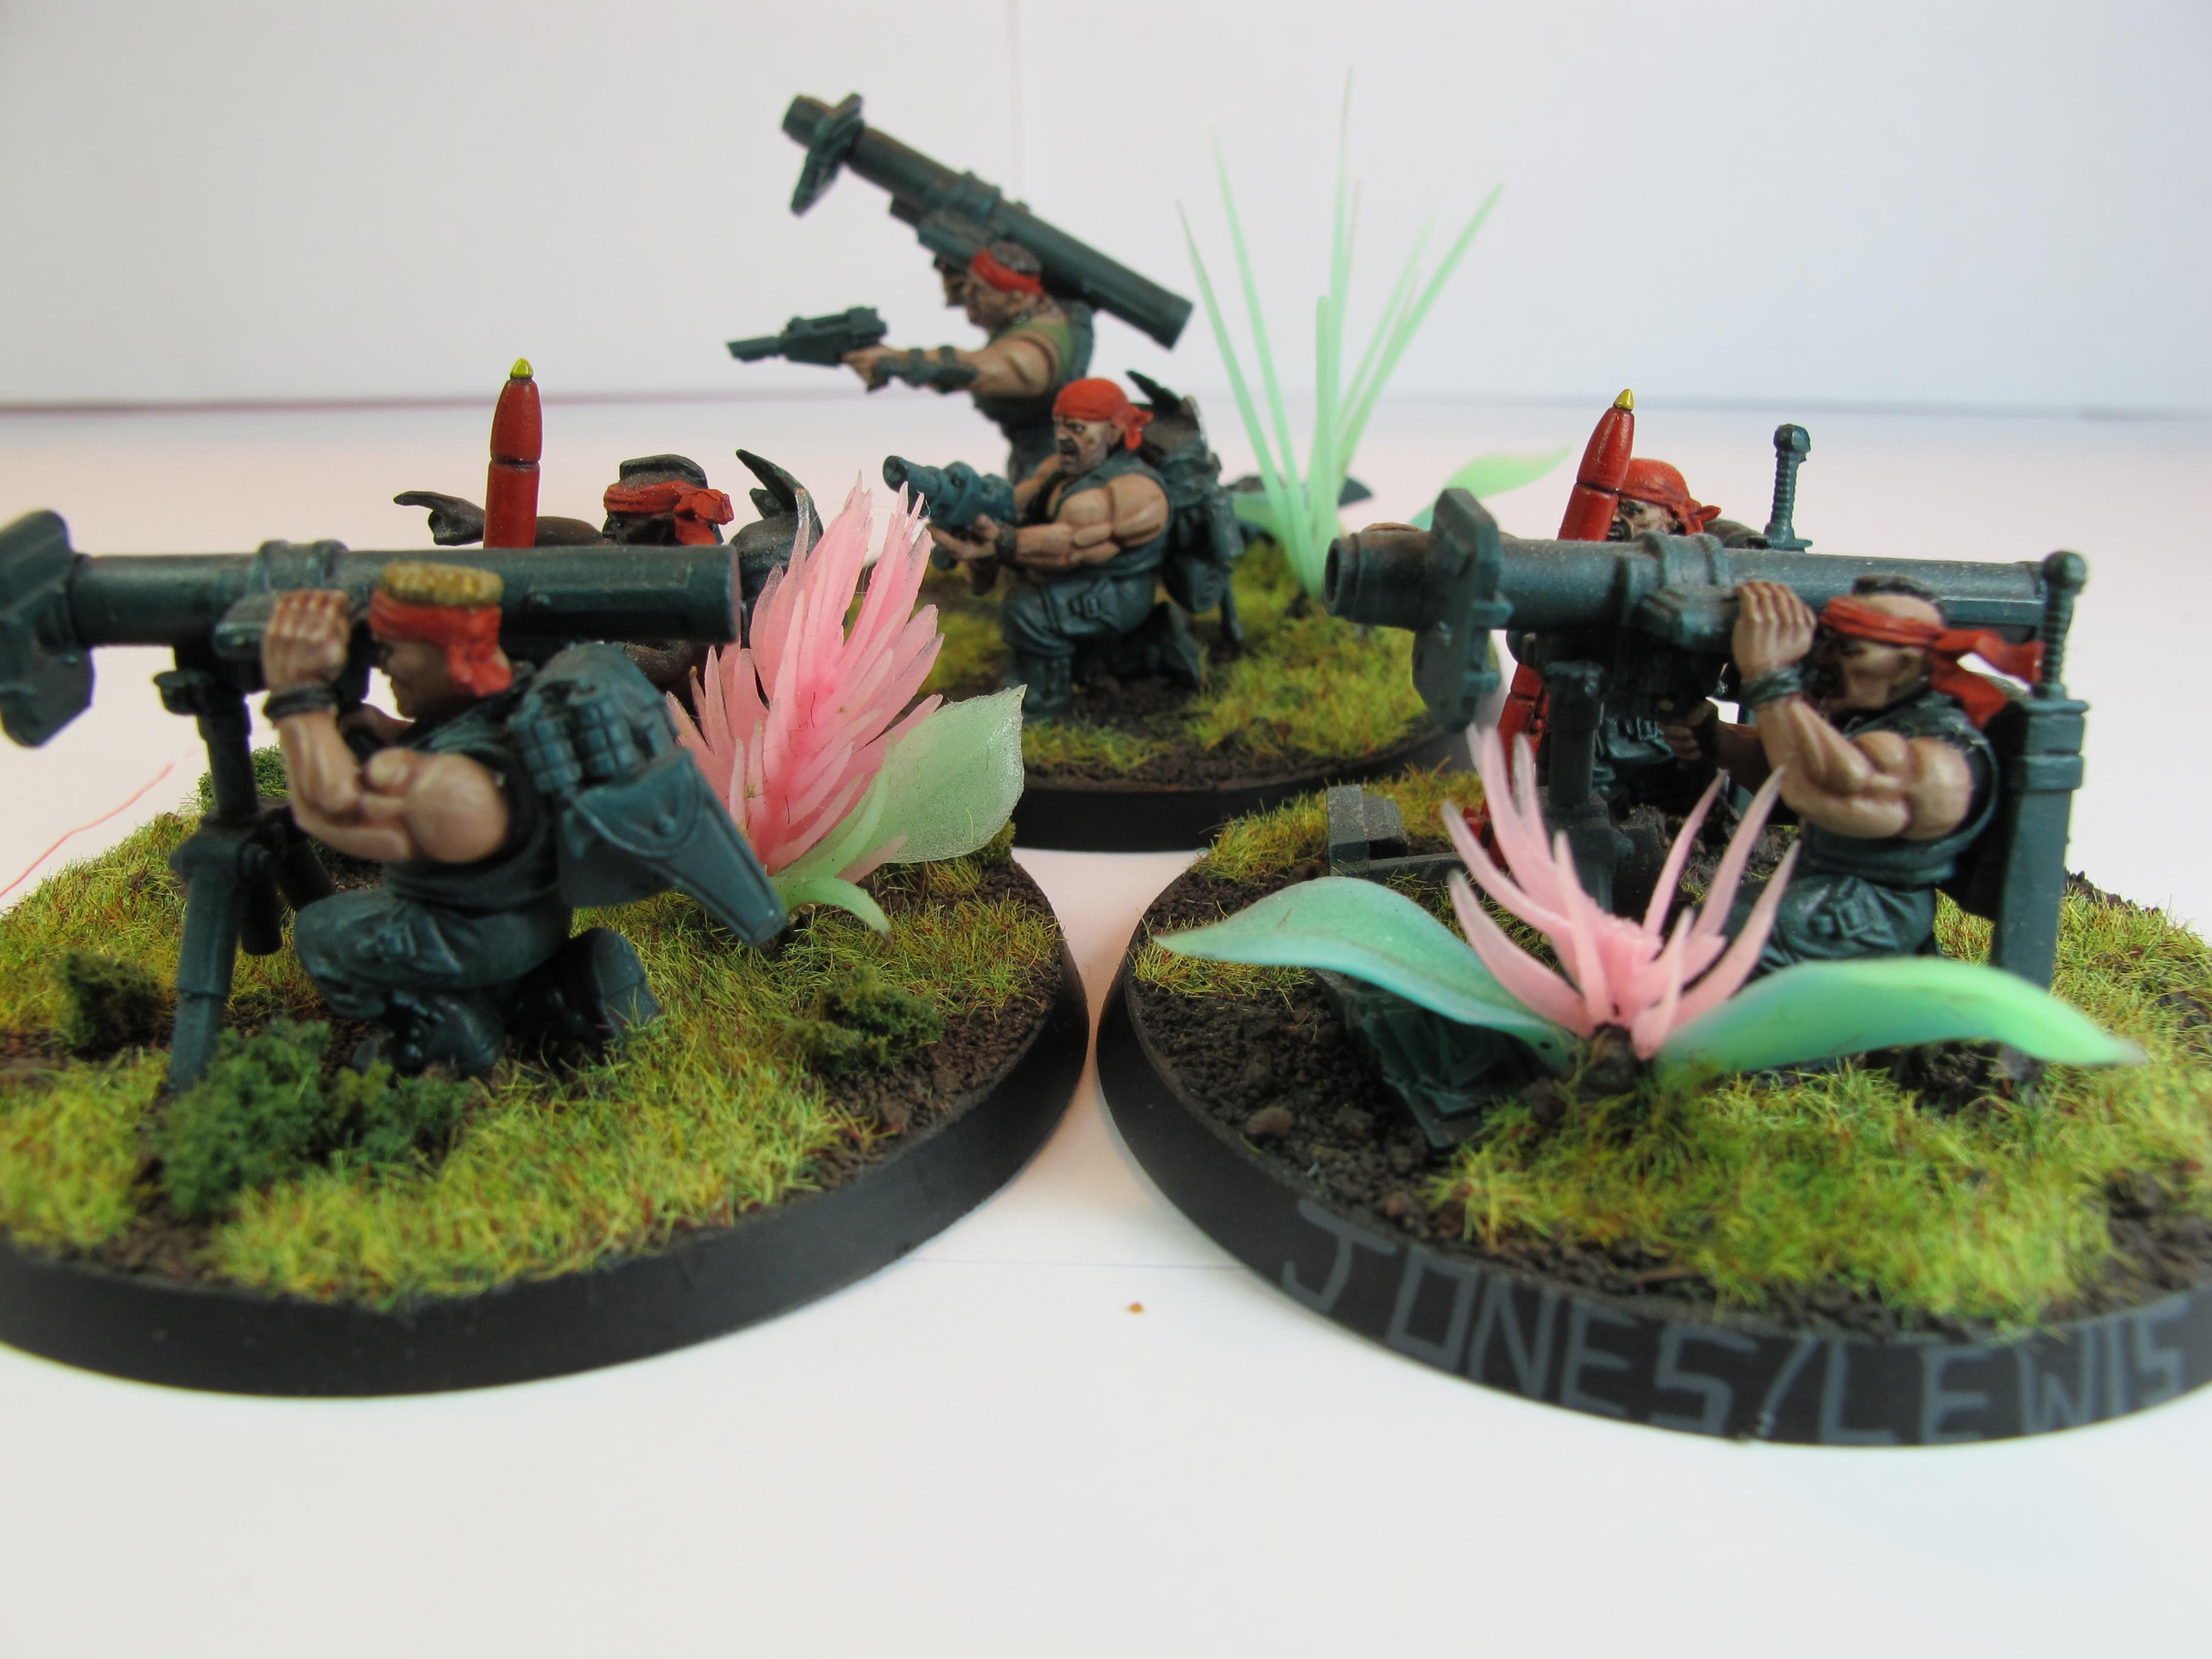 Catachan, Catachan Jungle Fighters, Catachans, Heavy Weapons Squad, Heavy Weapons Team, Imperial Guard, Lasgun, Laspistol, Missile Launcher, Warhammer 40,000